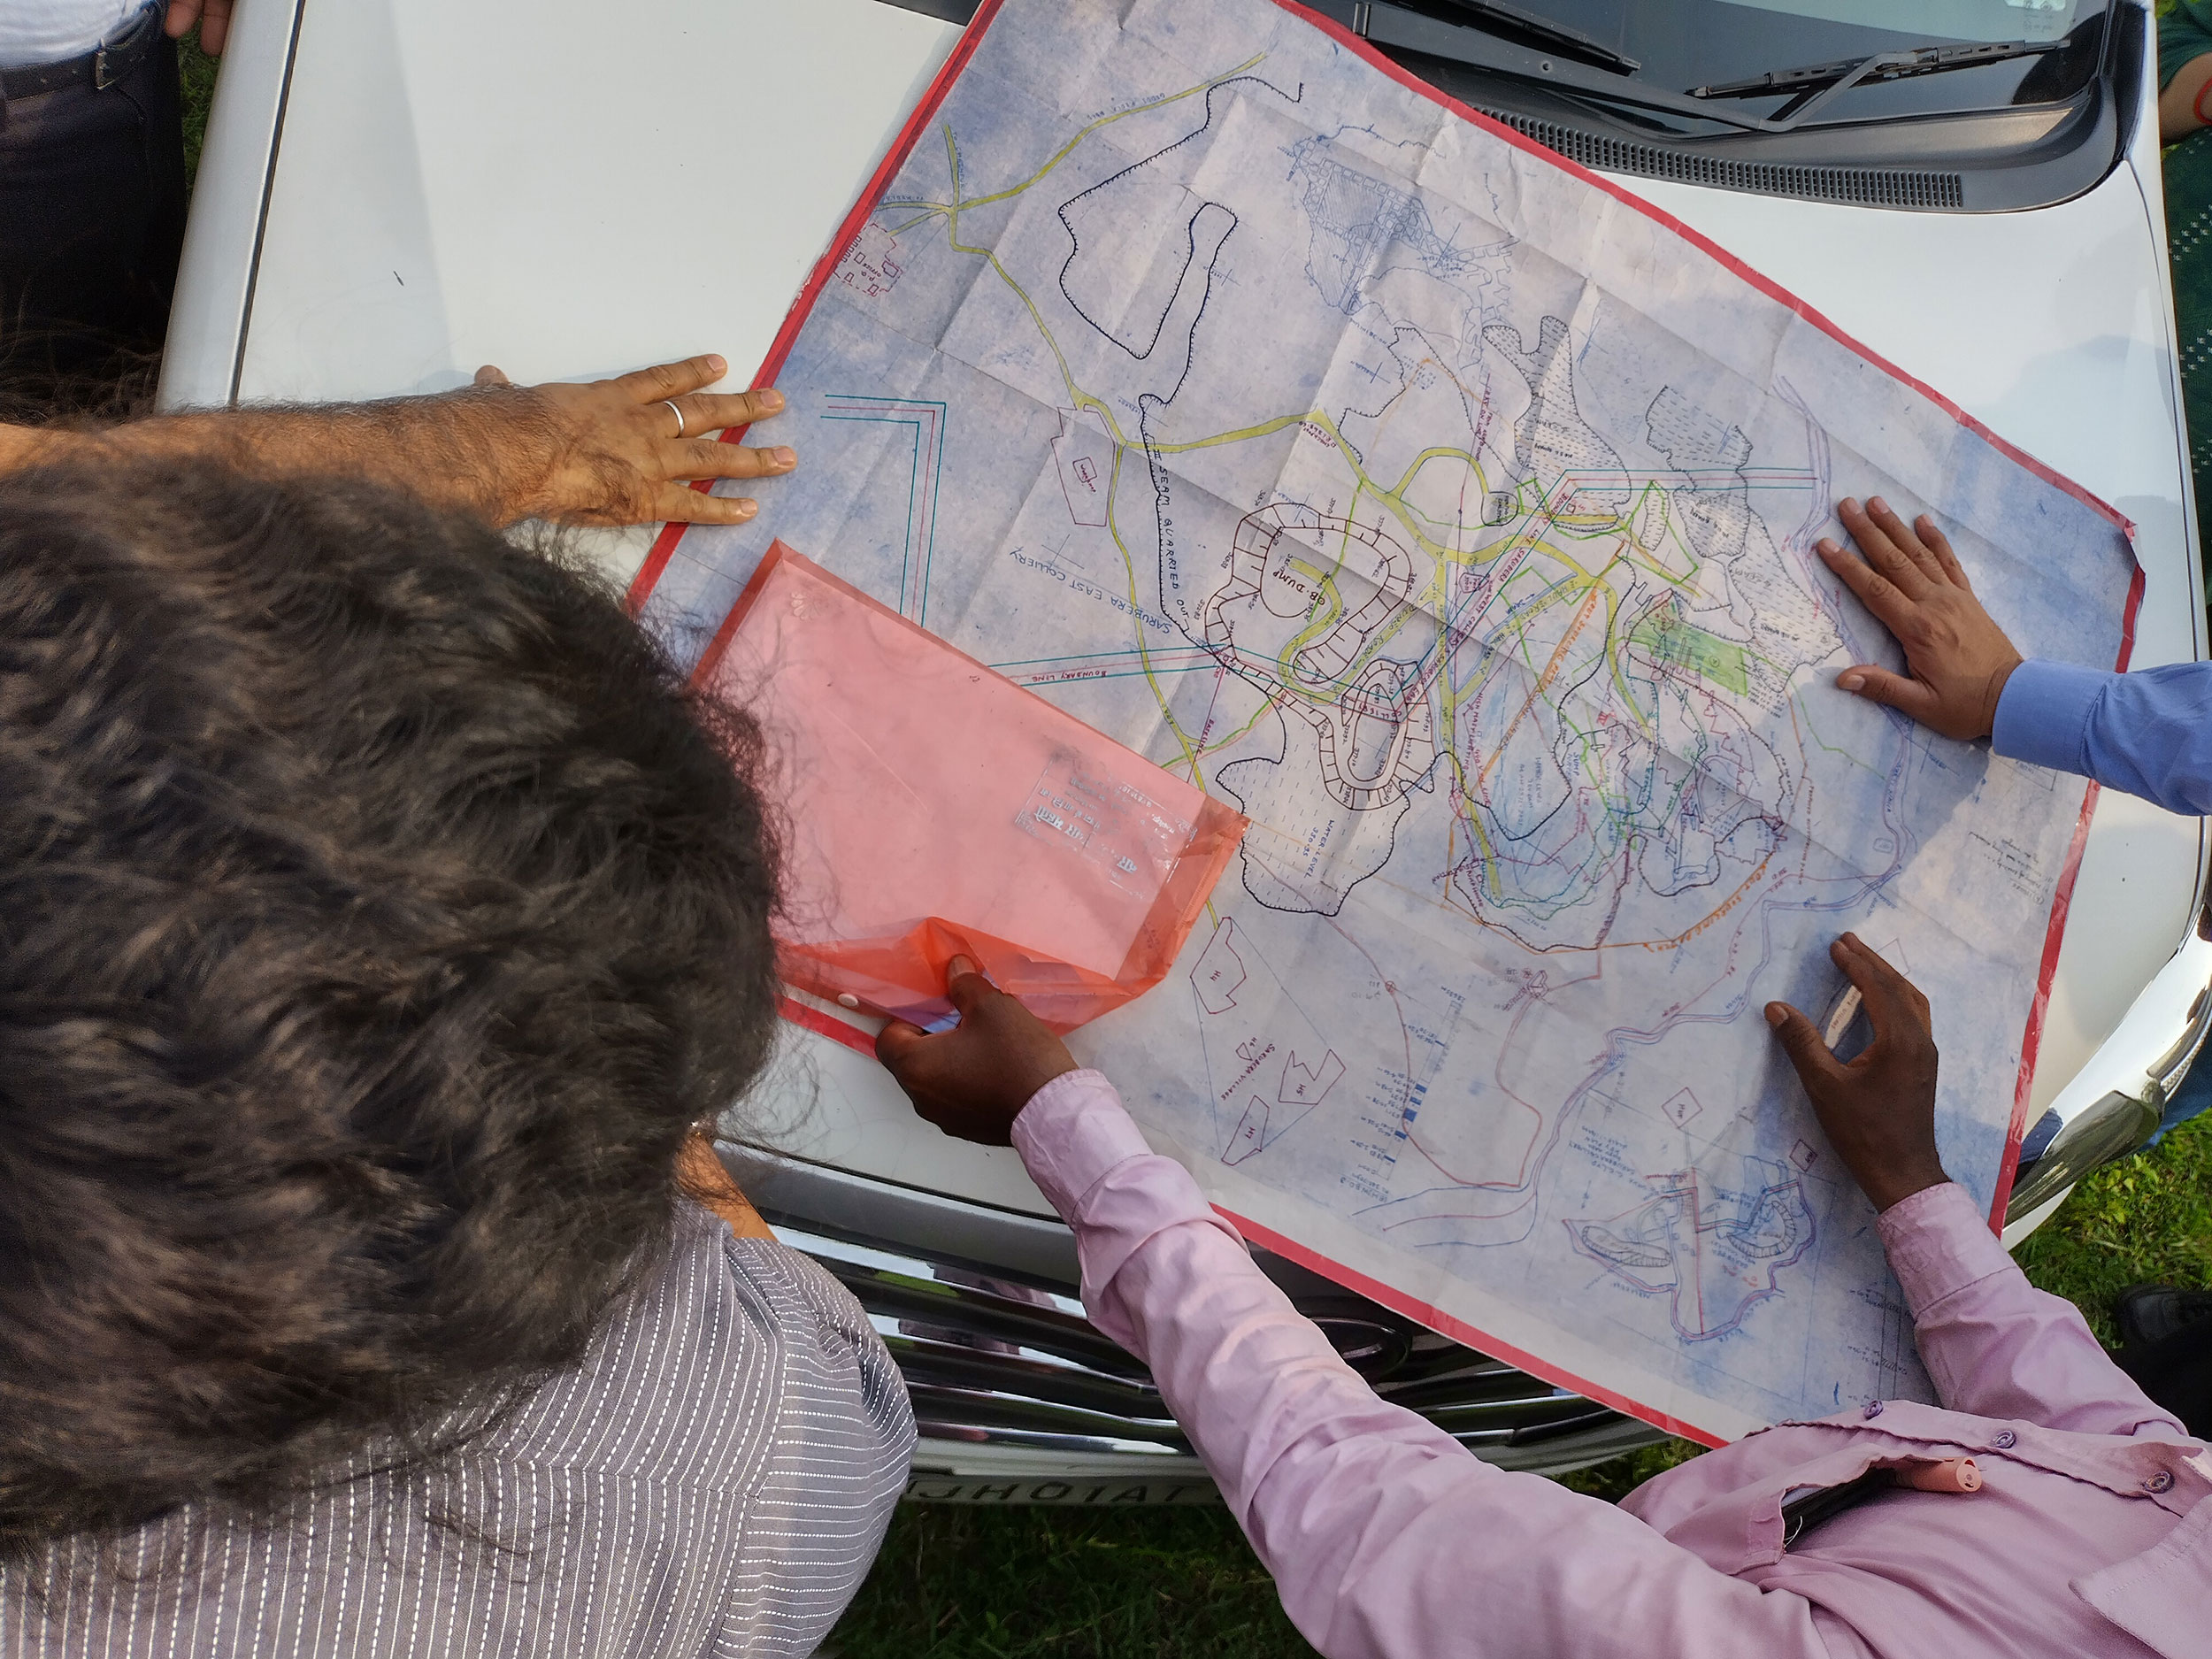 Discussion of future plans for coal mine in Jharkhand; Copyright:GIZ / Joscha Rosenbusch 2022